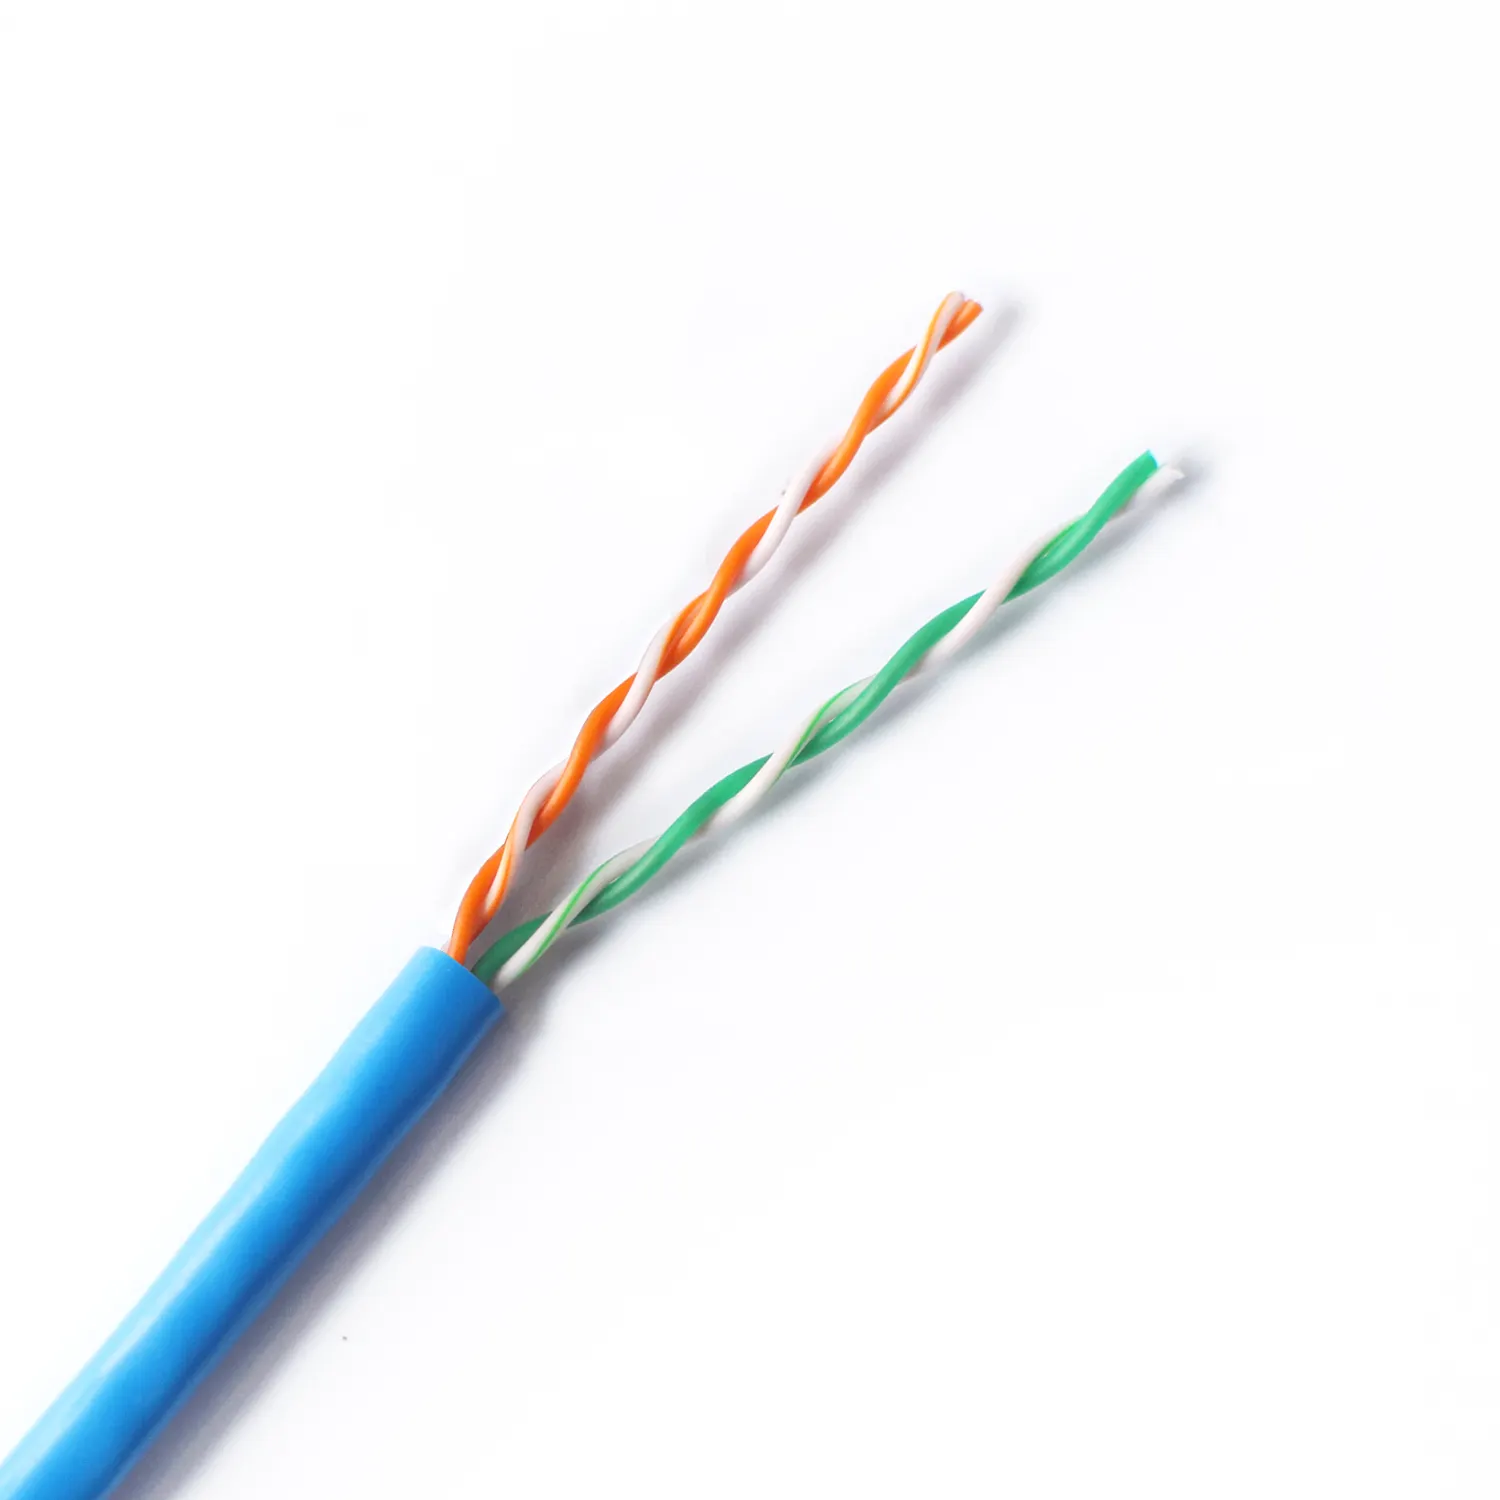 Twisted pair cable 100m x 1.5mm thick suitable for all Eyevision® 2 wire systems 